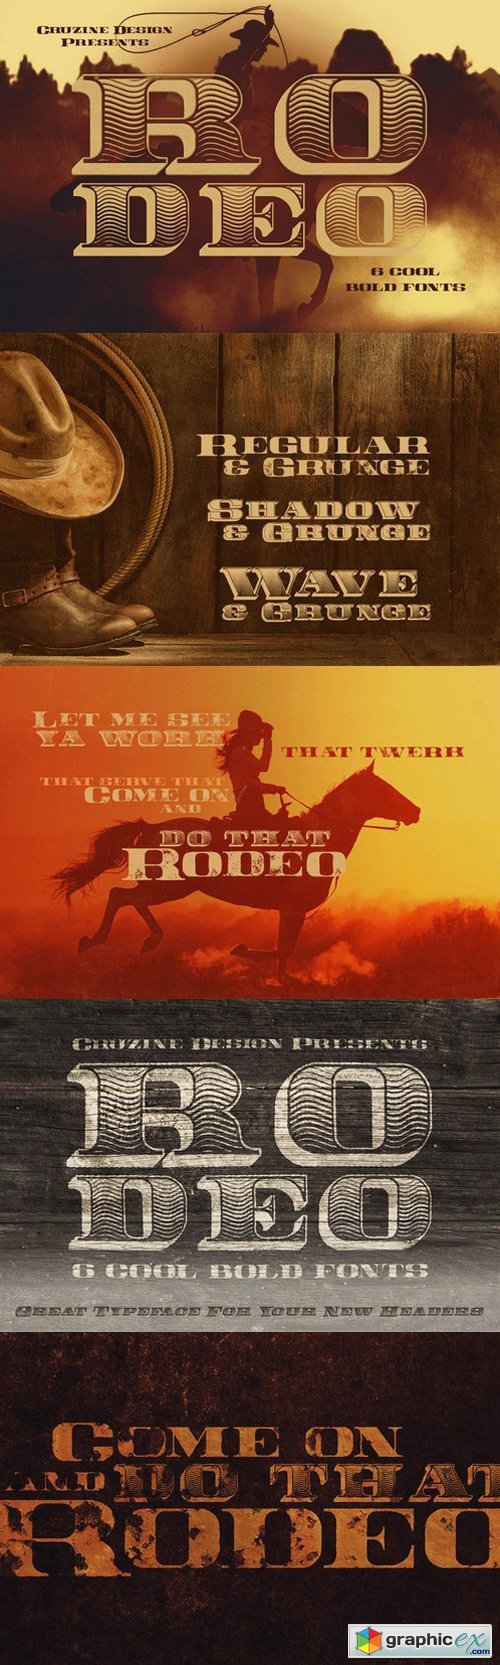 Rodeo Typeface